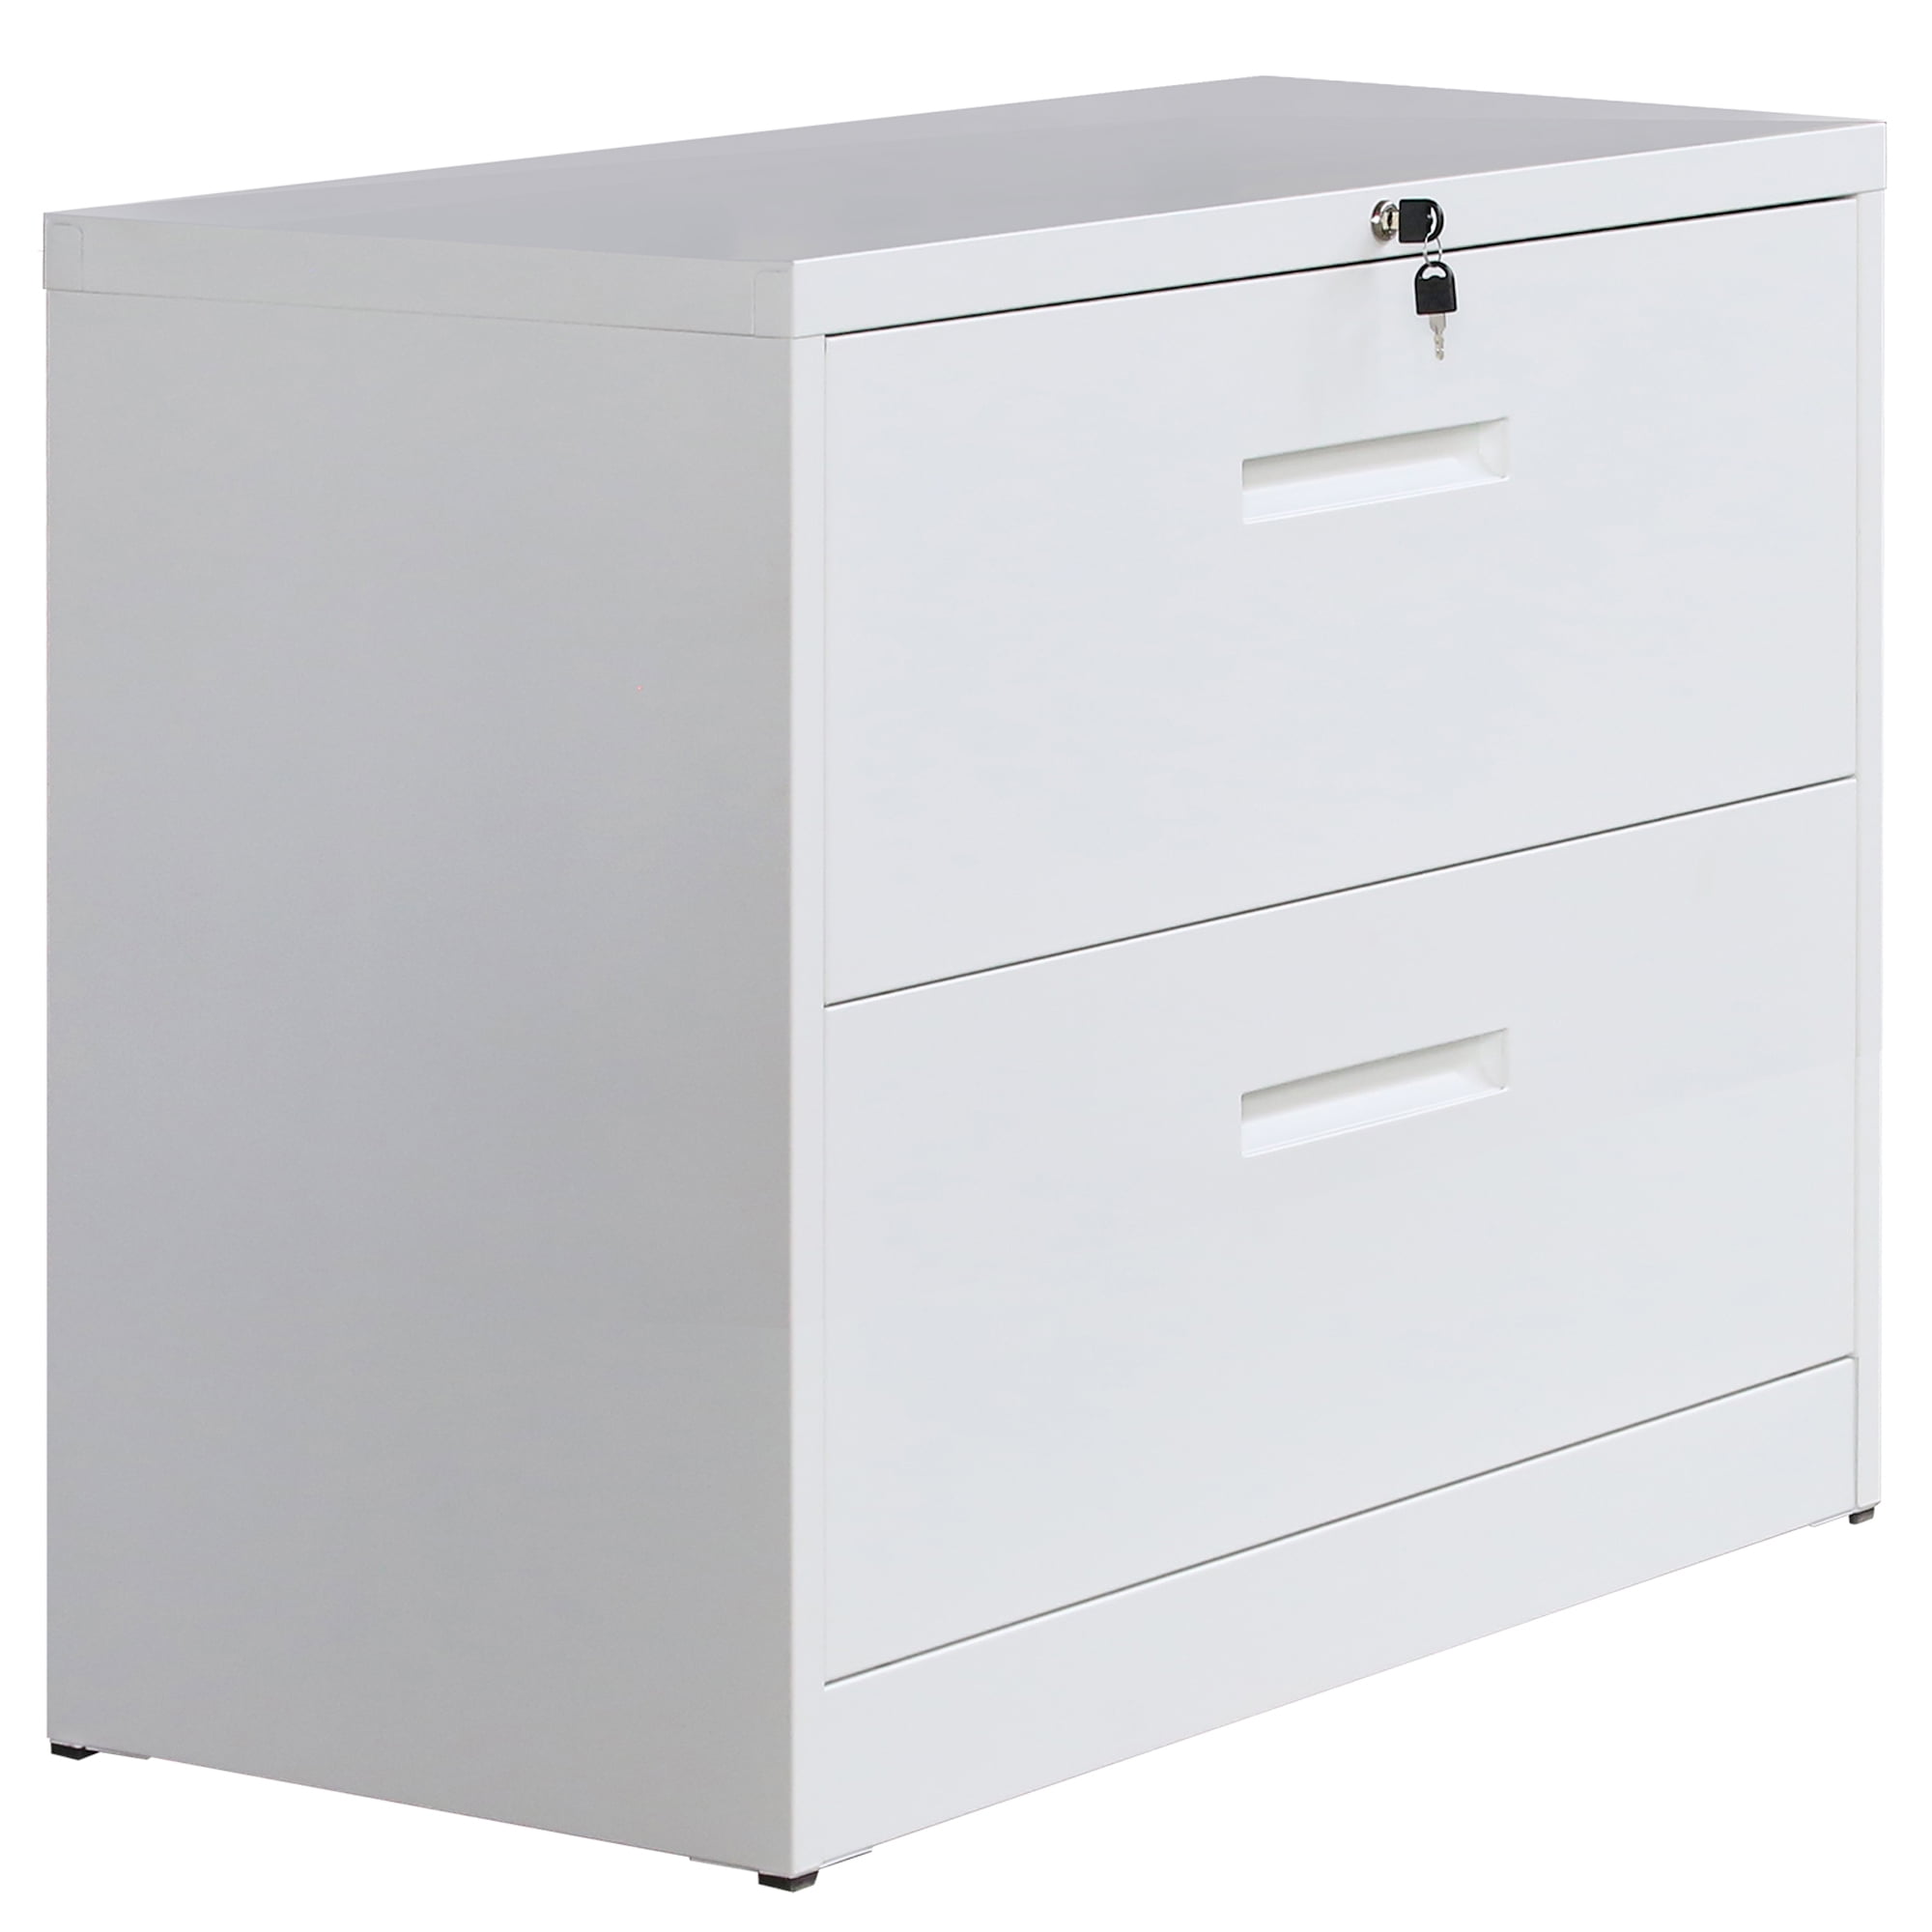 2 Drawer Filing Cabinet Modern, Contemporary Lateral File Cabinets